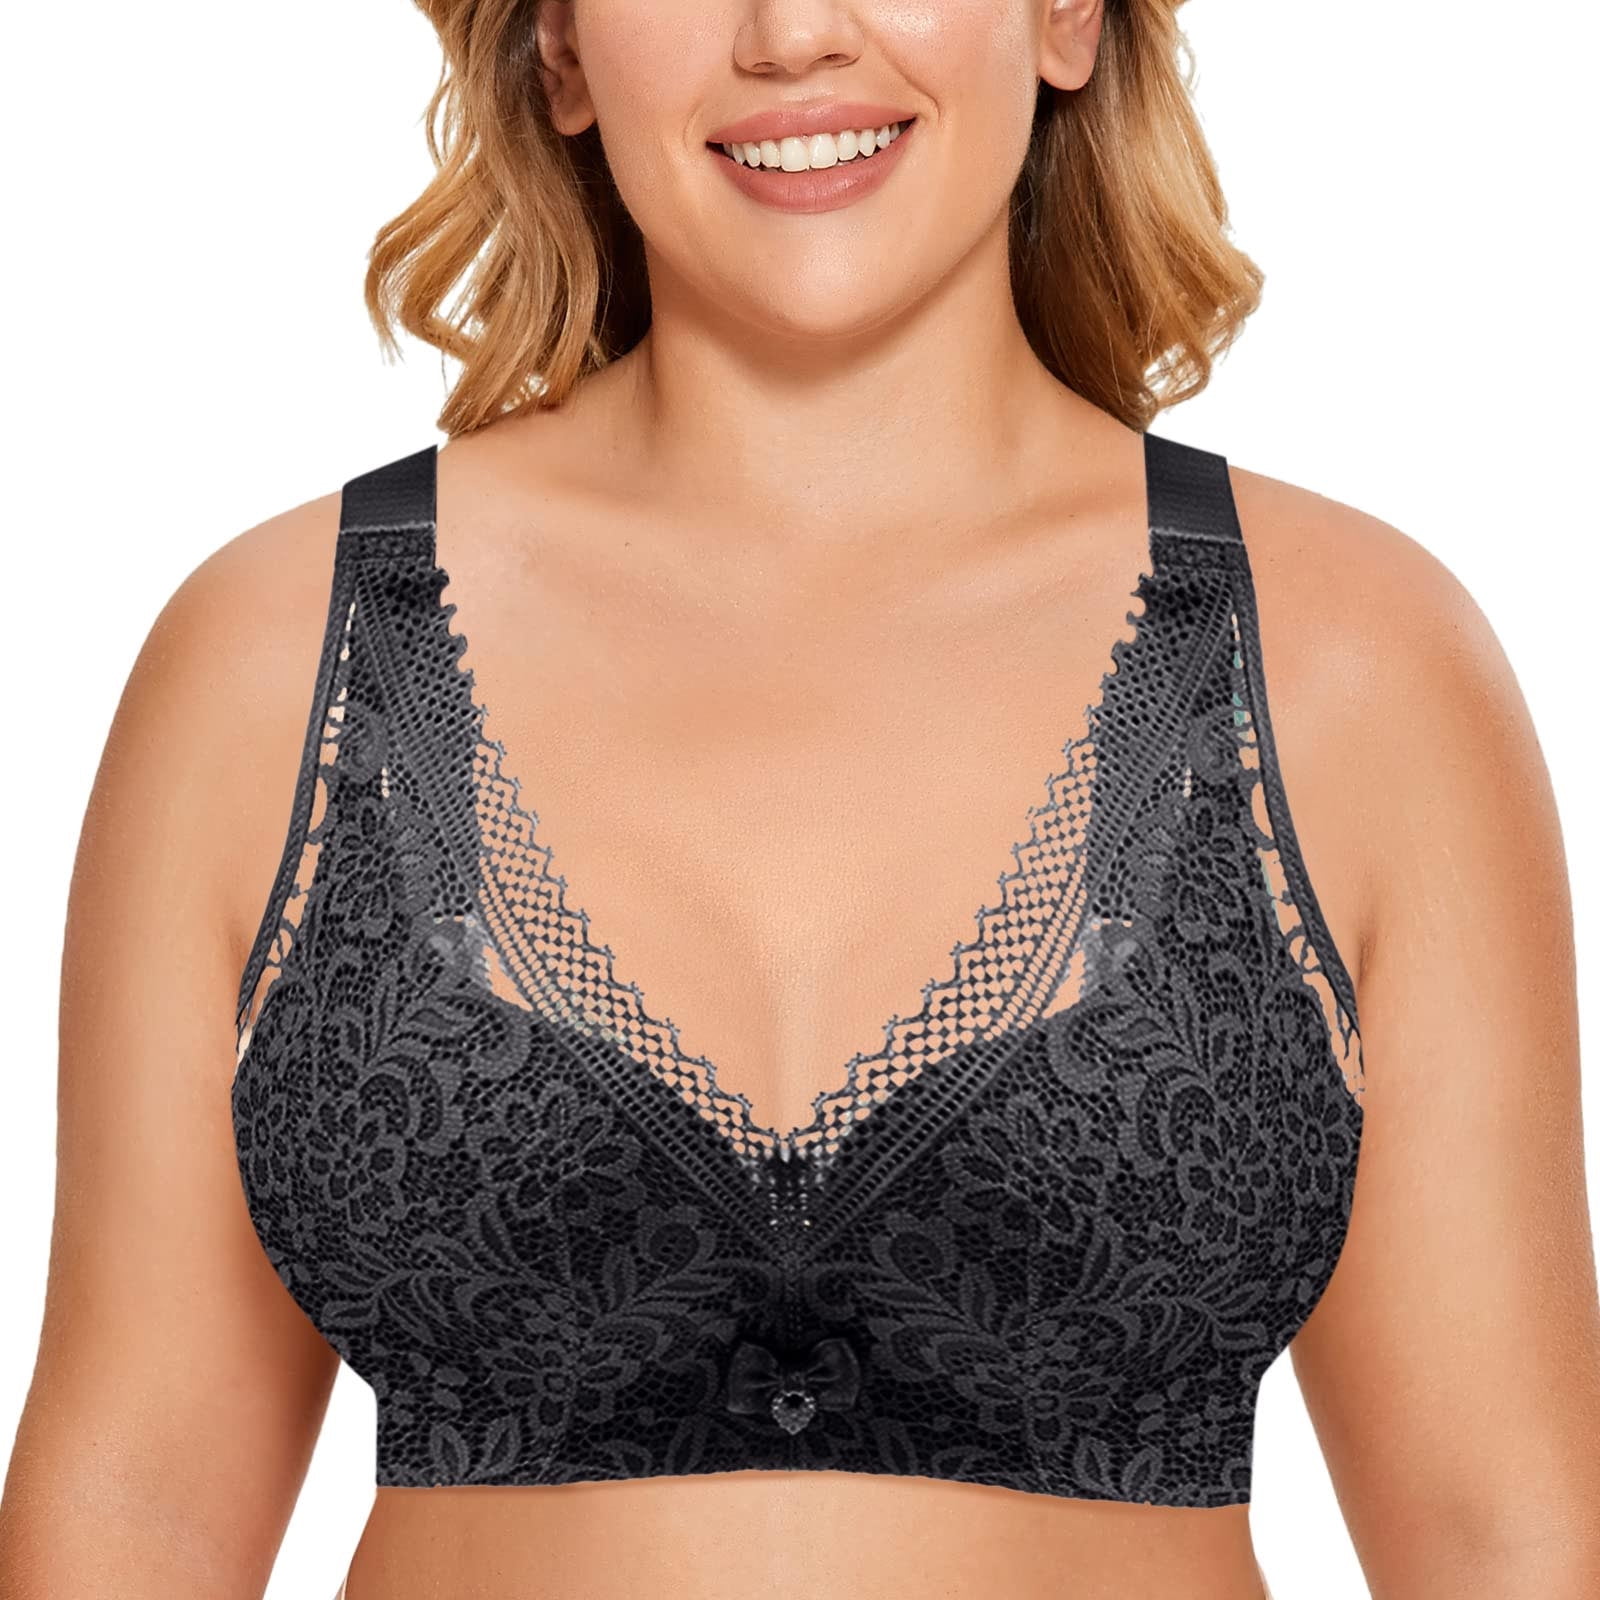 Bras for Women Padded Push Up Bra Embroidered Lace Bra Add Cups Bra  Underwire Front Closure Butterfly Brassiere Backless Breast Seamless Bras  Large